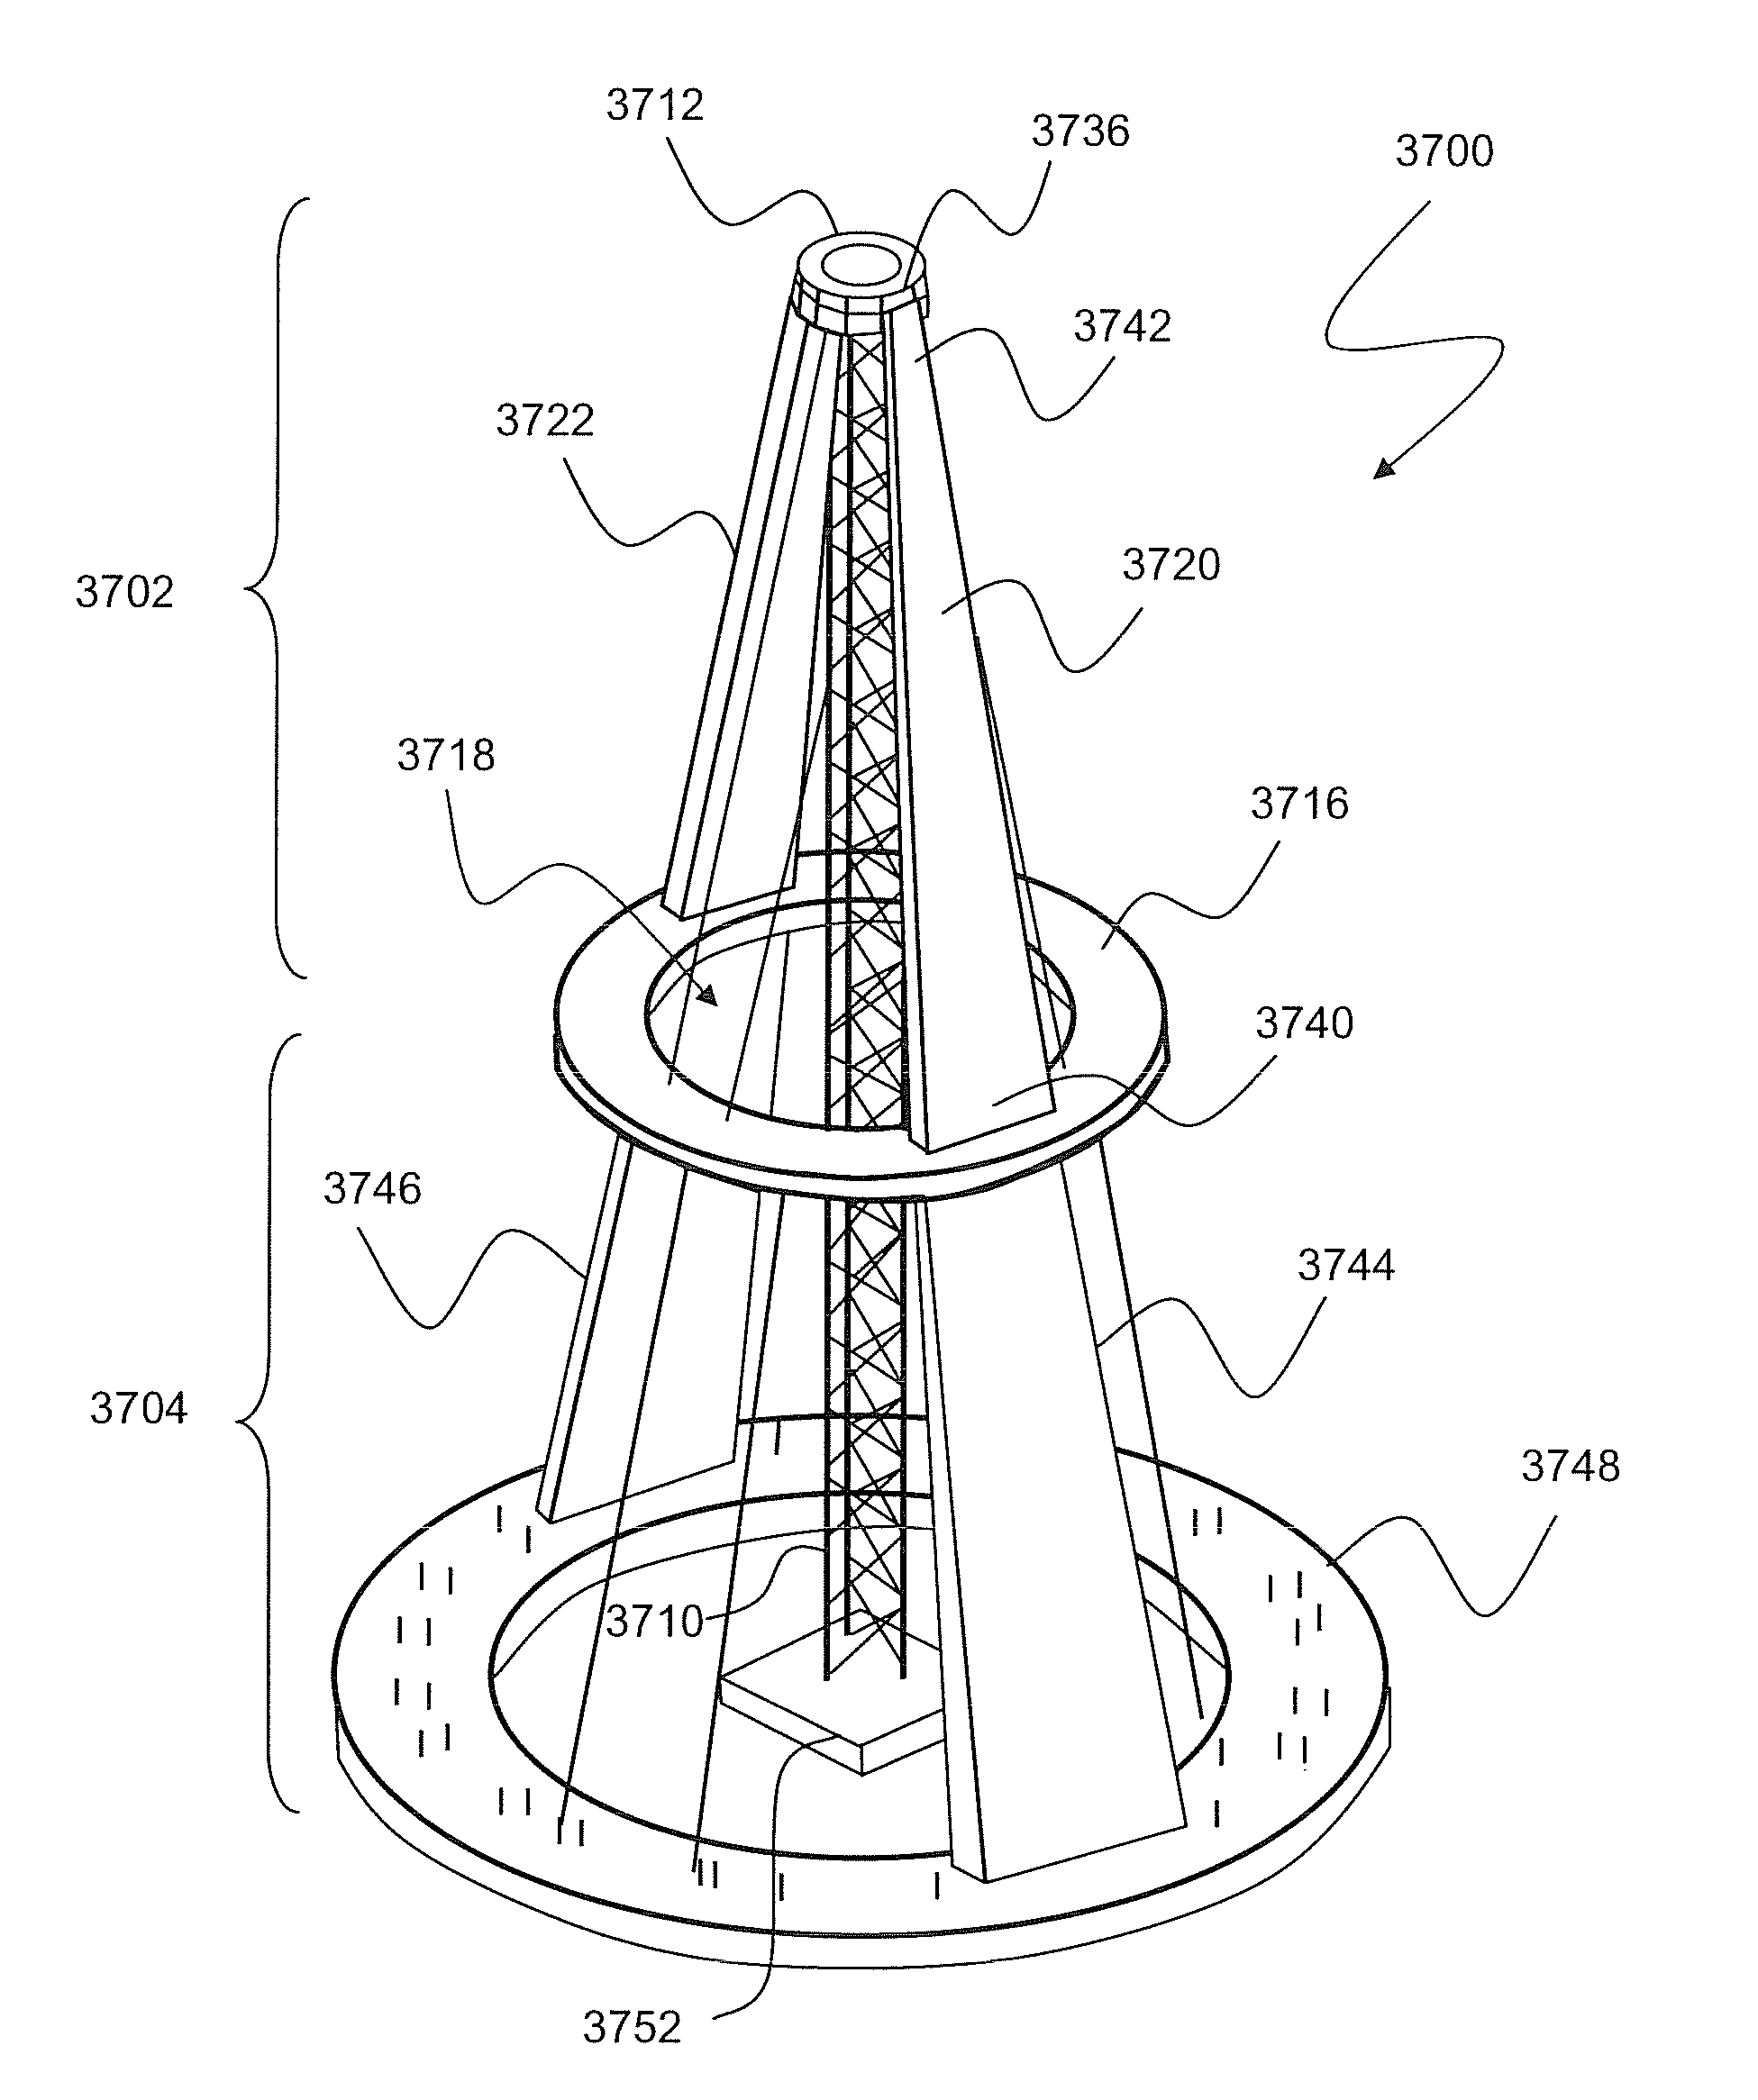 Base support for wind-driven power generators